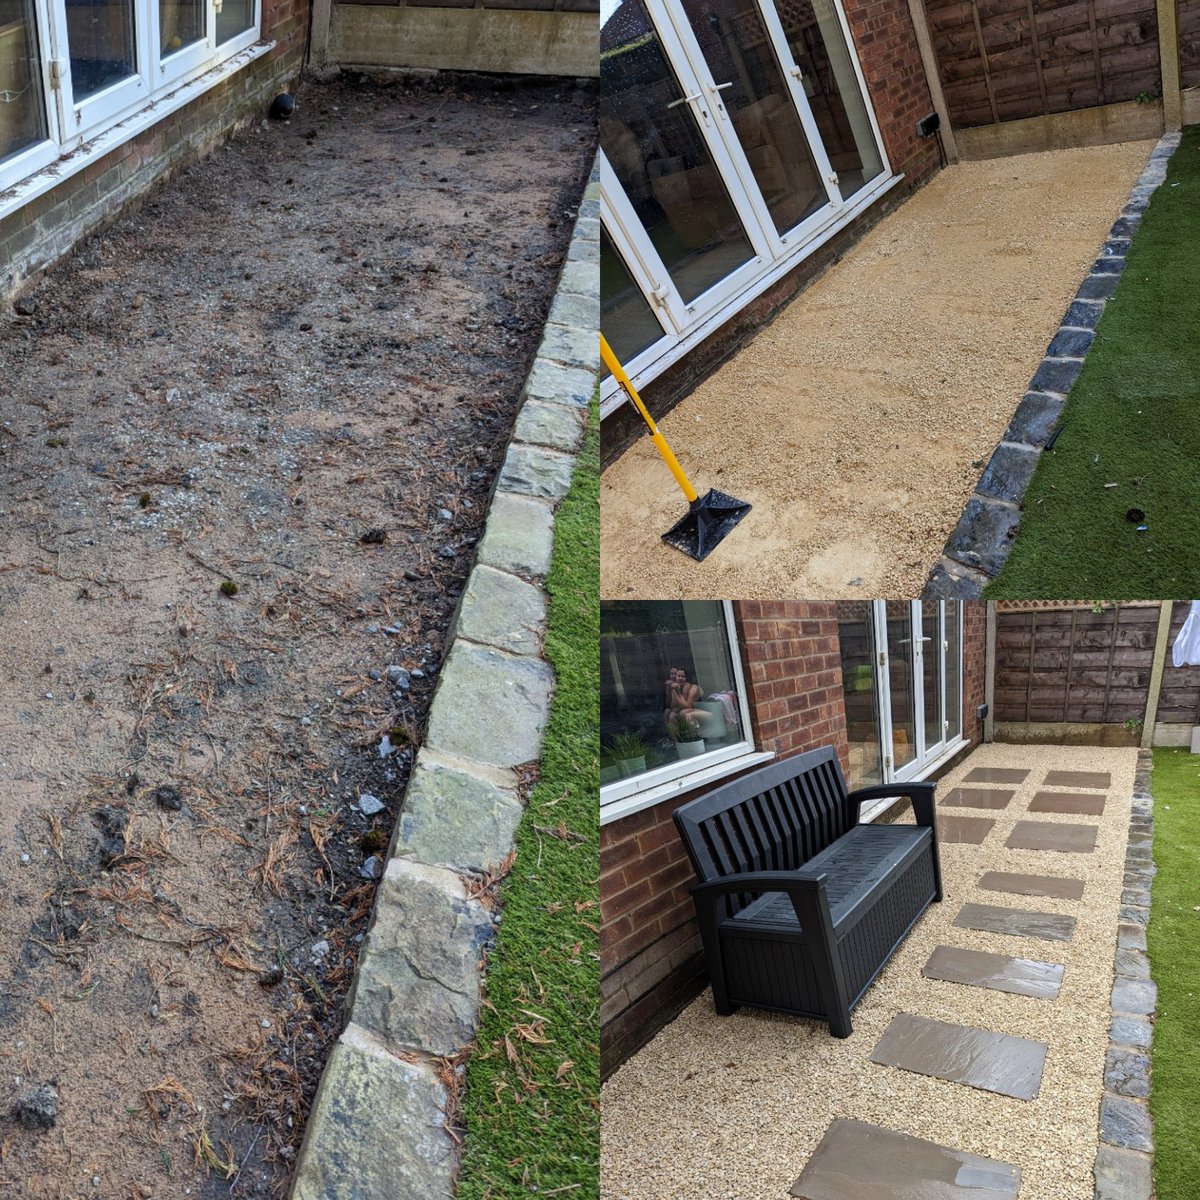 A very rare occasion when I actually get to work on my own garden 😂
Small landscaping jobs like this no trouble for our team 👍
#gardener #didsbury #heatonmoor #withington #chorlton 
eco-gardener.co.uk